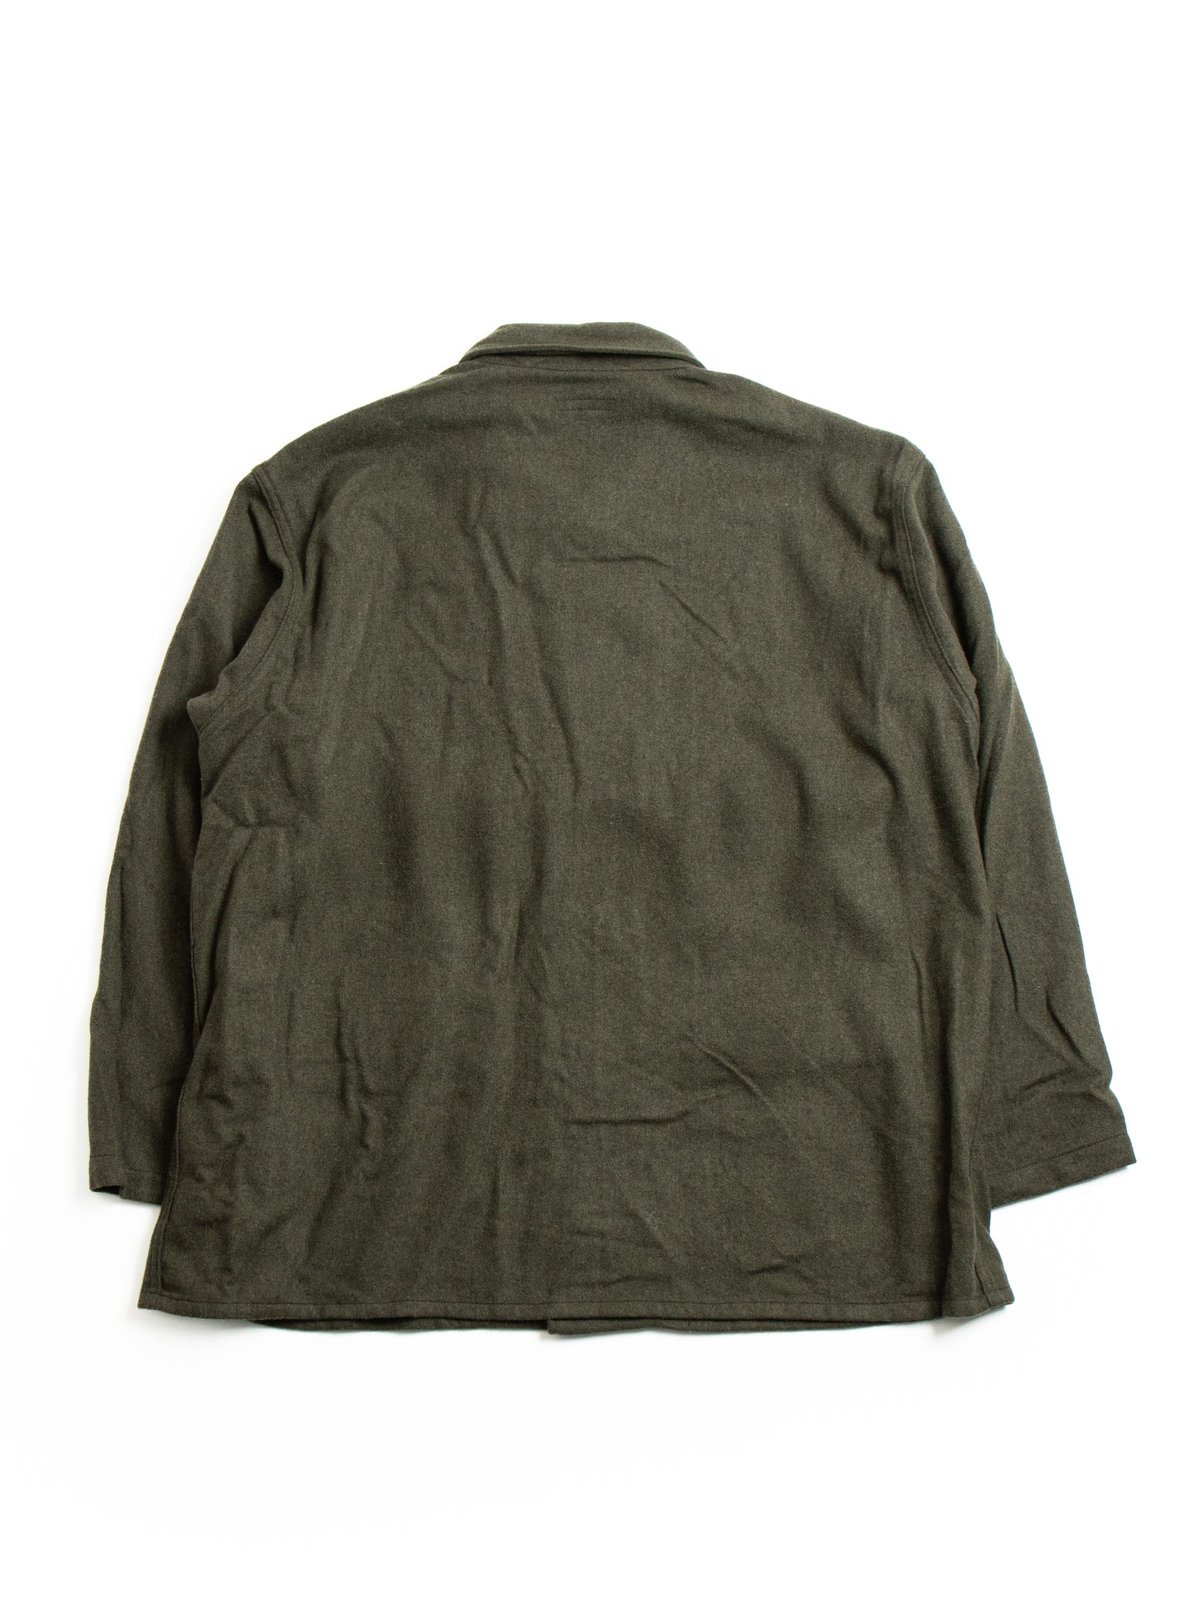 BA SHIRT JACKET OLIVE SOLID POLY WOOL FLANNEL by Engineered Garments ...